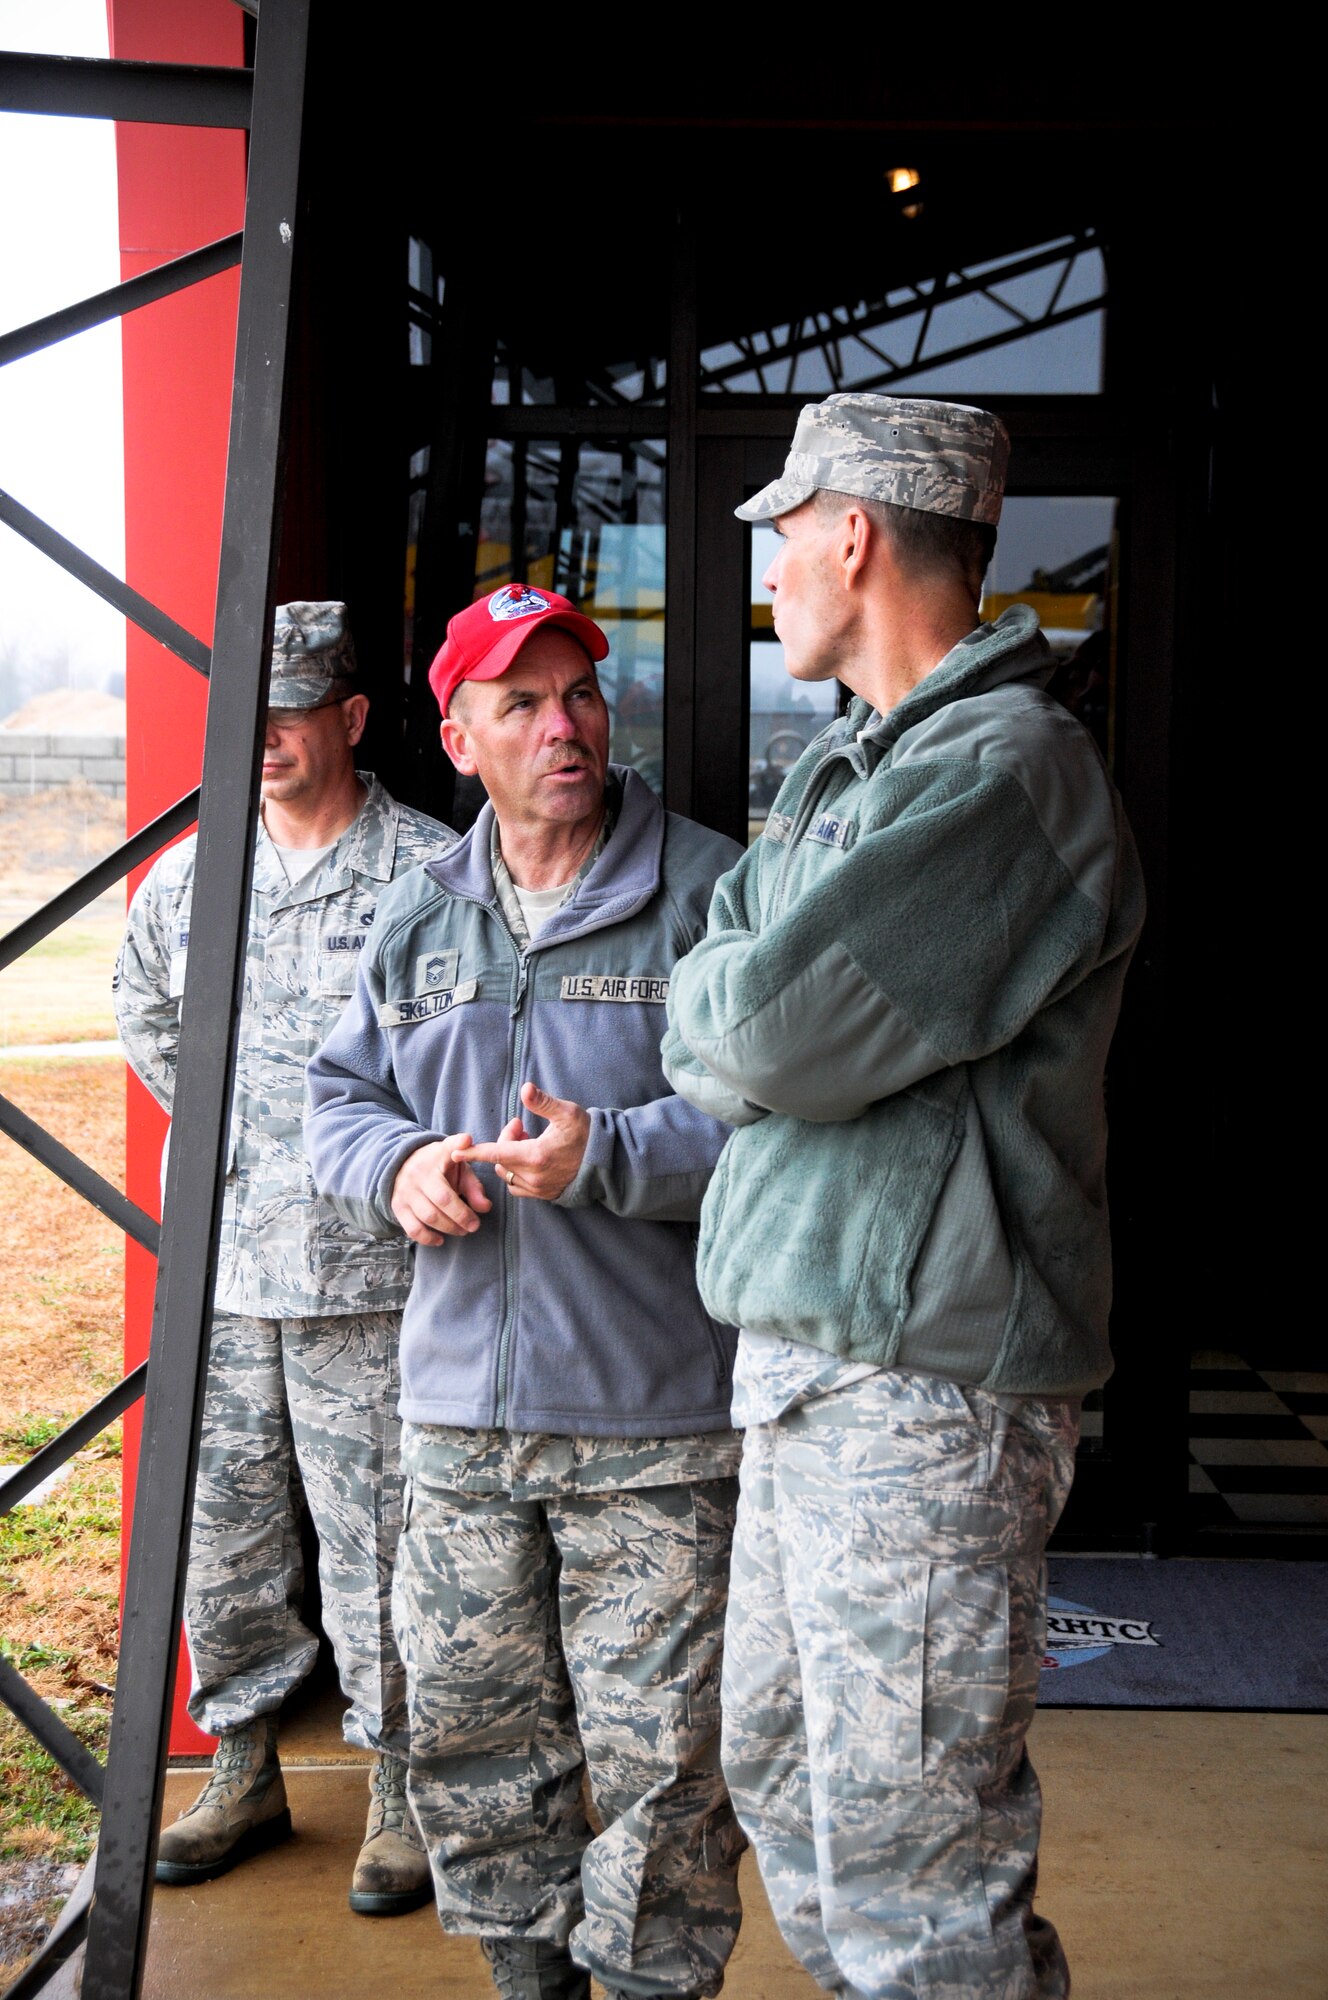 Chief Master Sgt. Gary Skelton, 188th Civil Engineer Squadron, discusses the capabilities of the Urban Search and Rescue facility at Ebbing Air National Guard Base with Lt. Gen. Stanley E. Clarke III, director of the Air National Guard, Dec. 5, 2014.  Clarke toured the 188th Wing’s facilities, spoke with Airmen, and learned about the unit’s mission and contributions to the Air National Guard on his day-long visit. (U.S. Air National Guard photo by Airman 1st Class Cody Martin/released) 